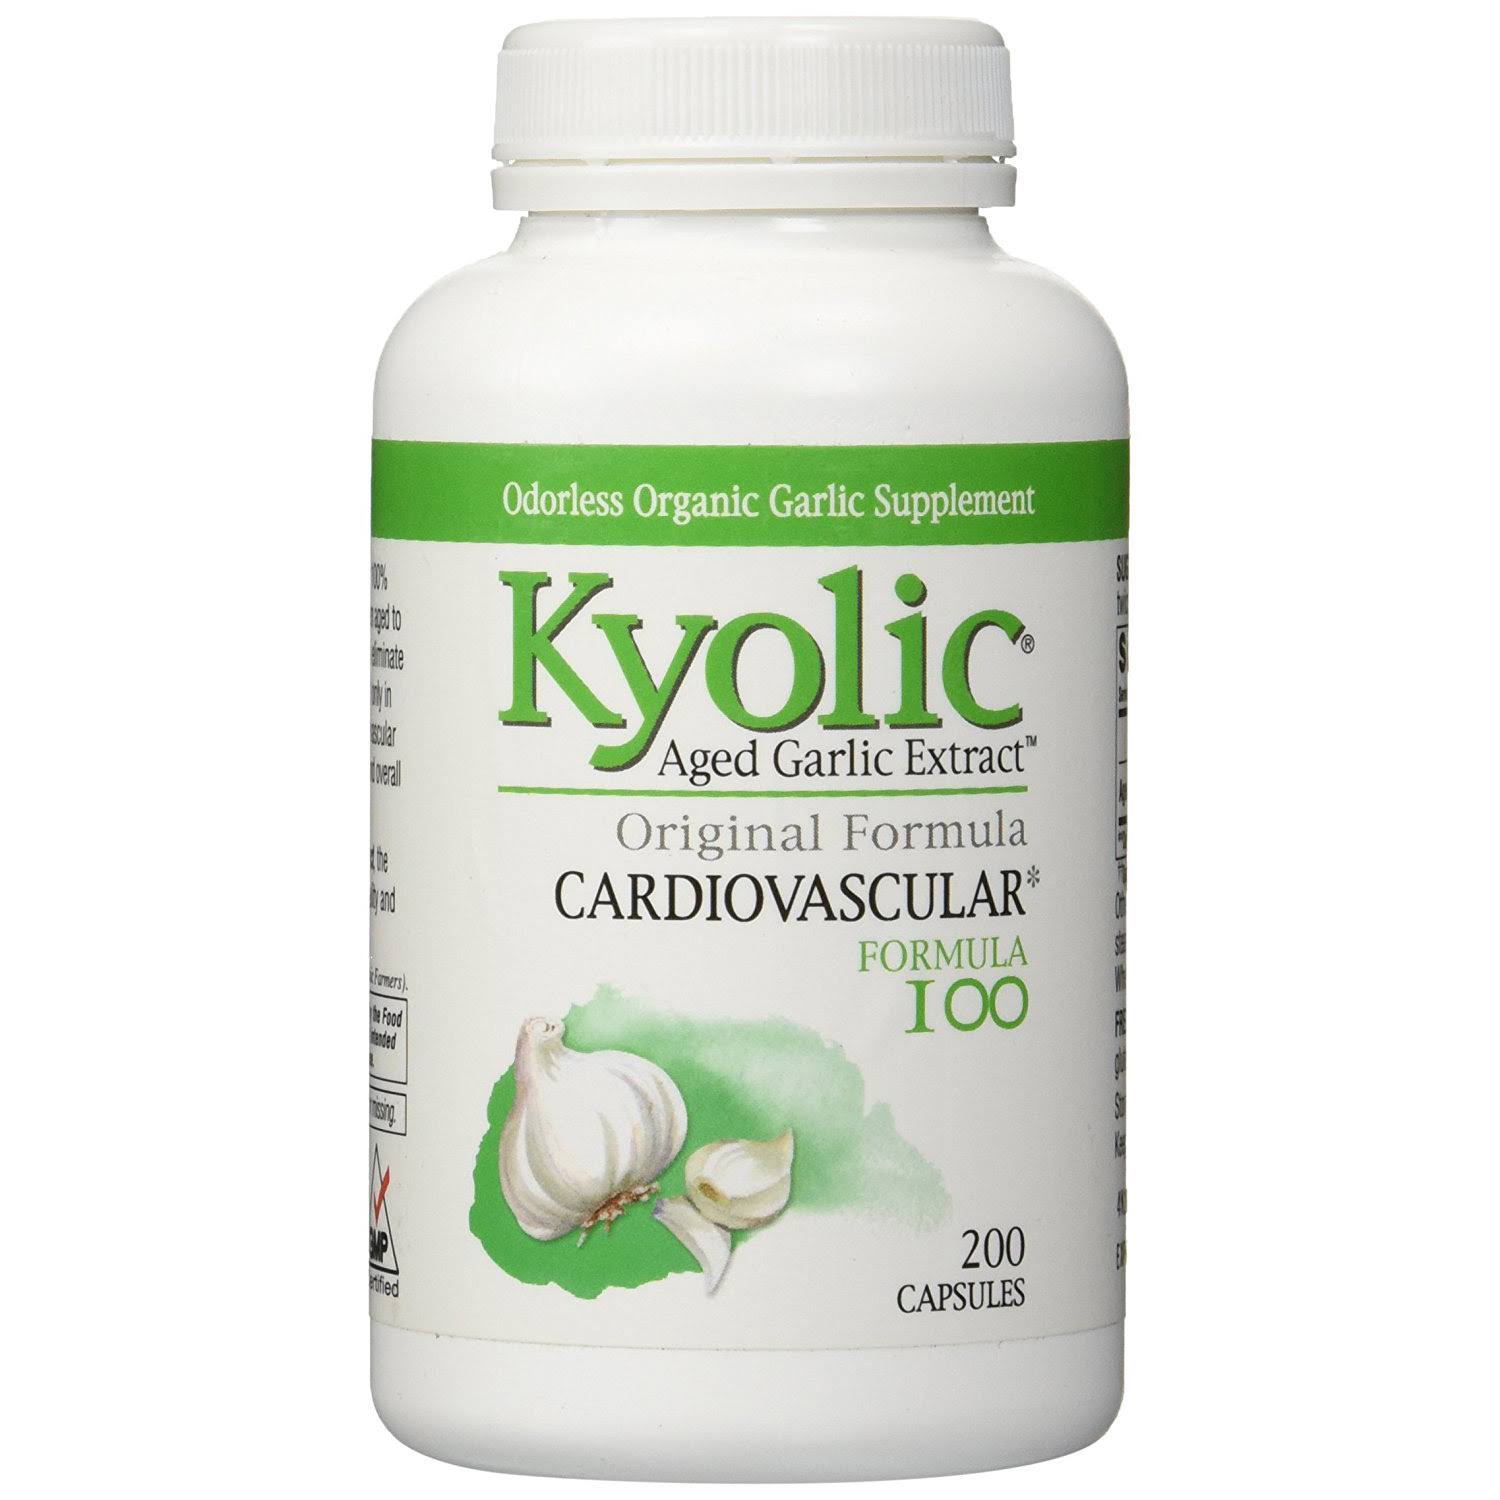 Kyolic Aged Garlic Extract Cardiovascular Supplement - 200 Tablets